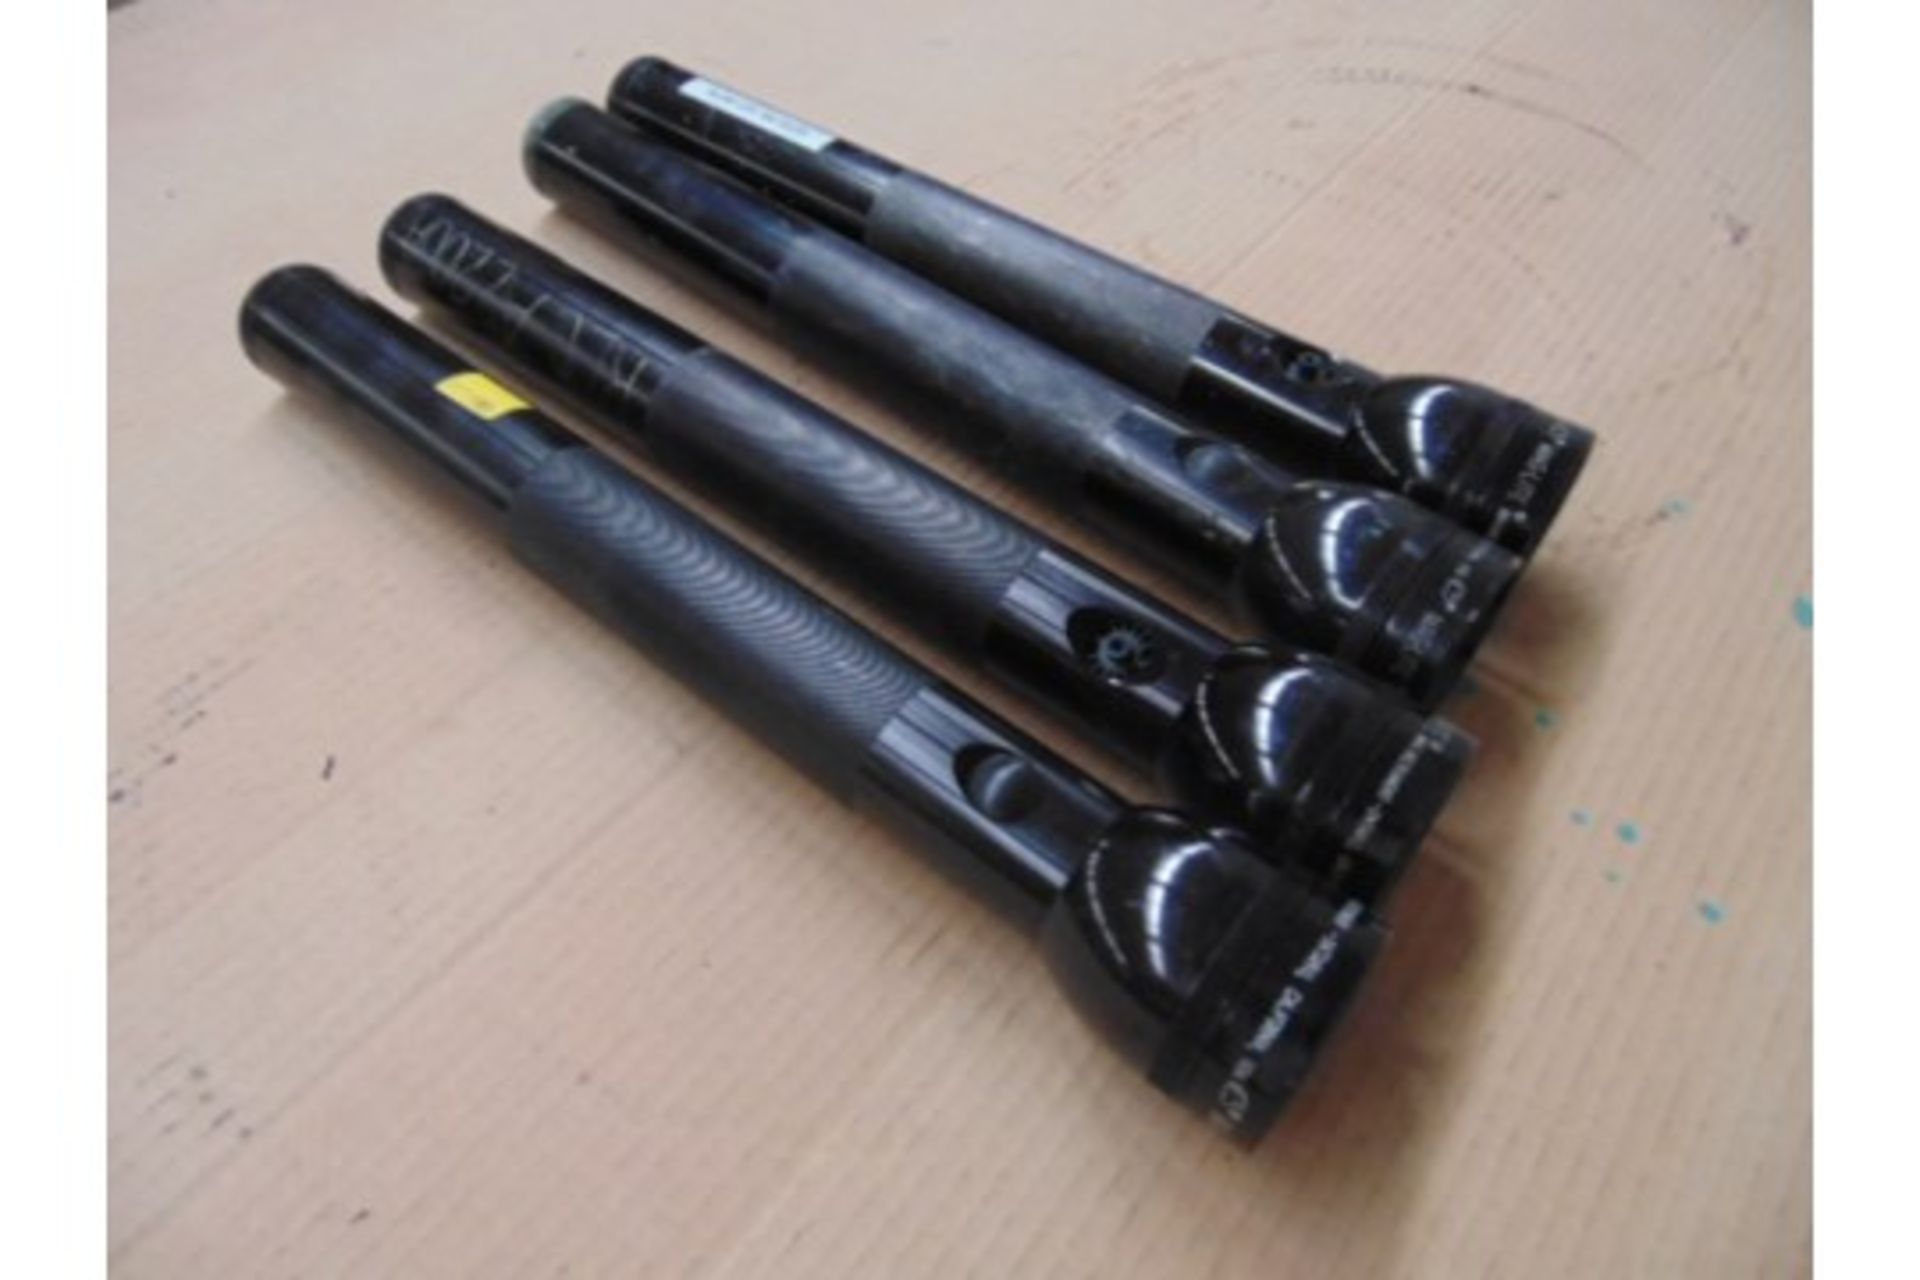 4 x Maglite Police Torches - Image 3 of 4